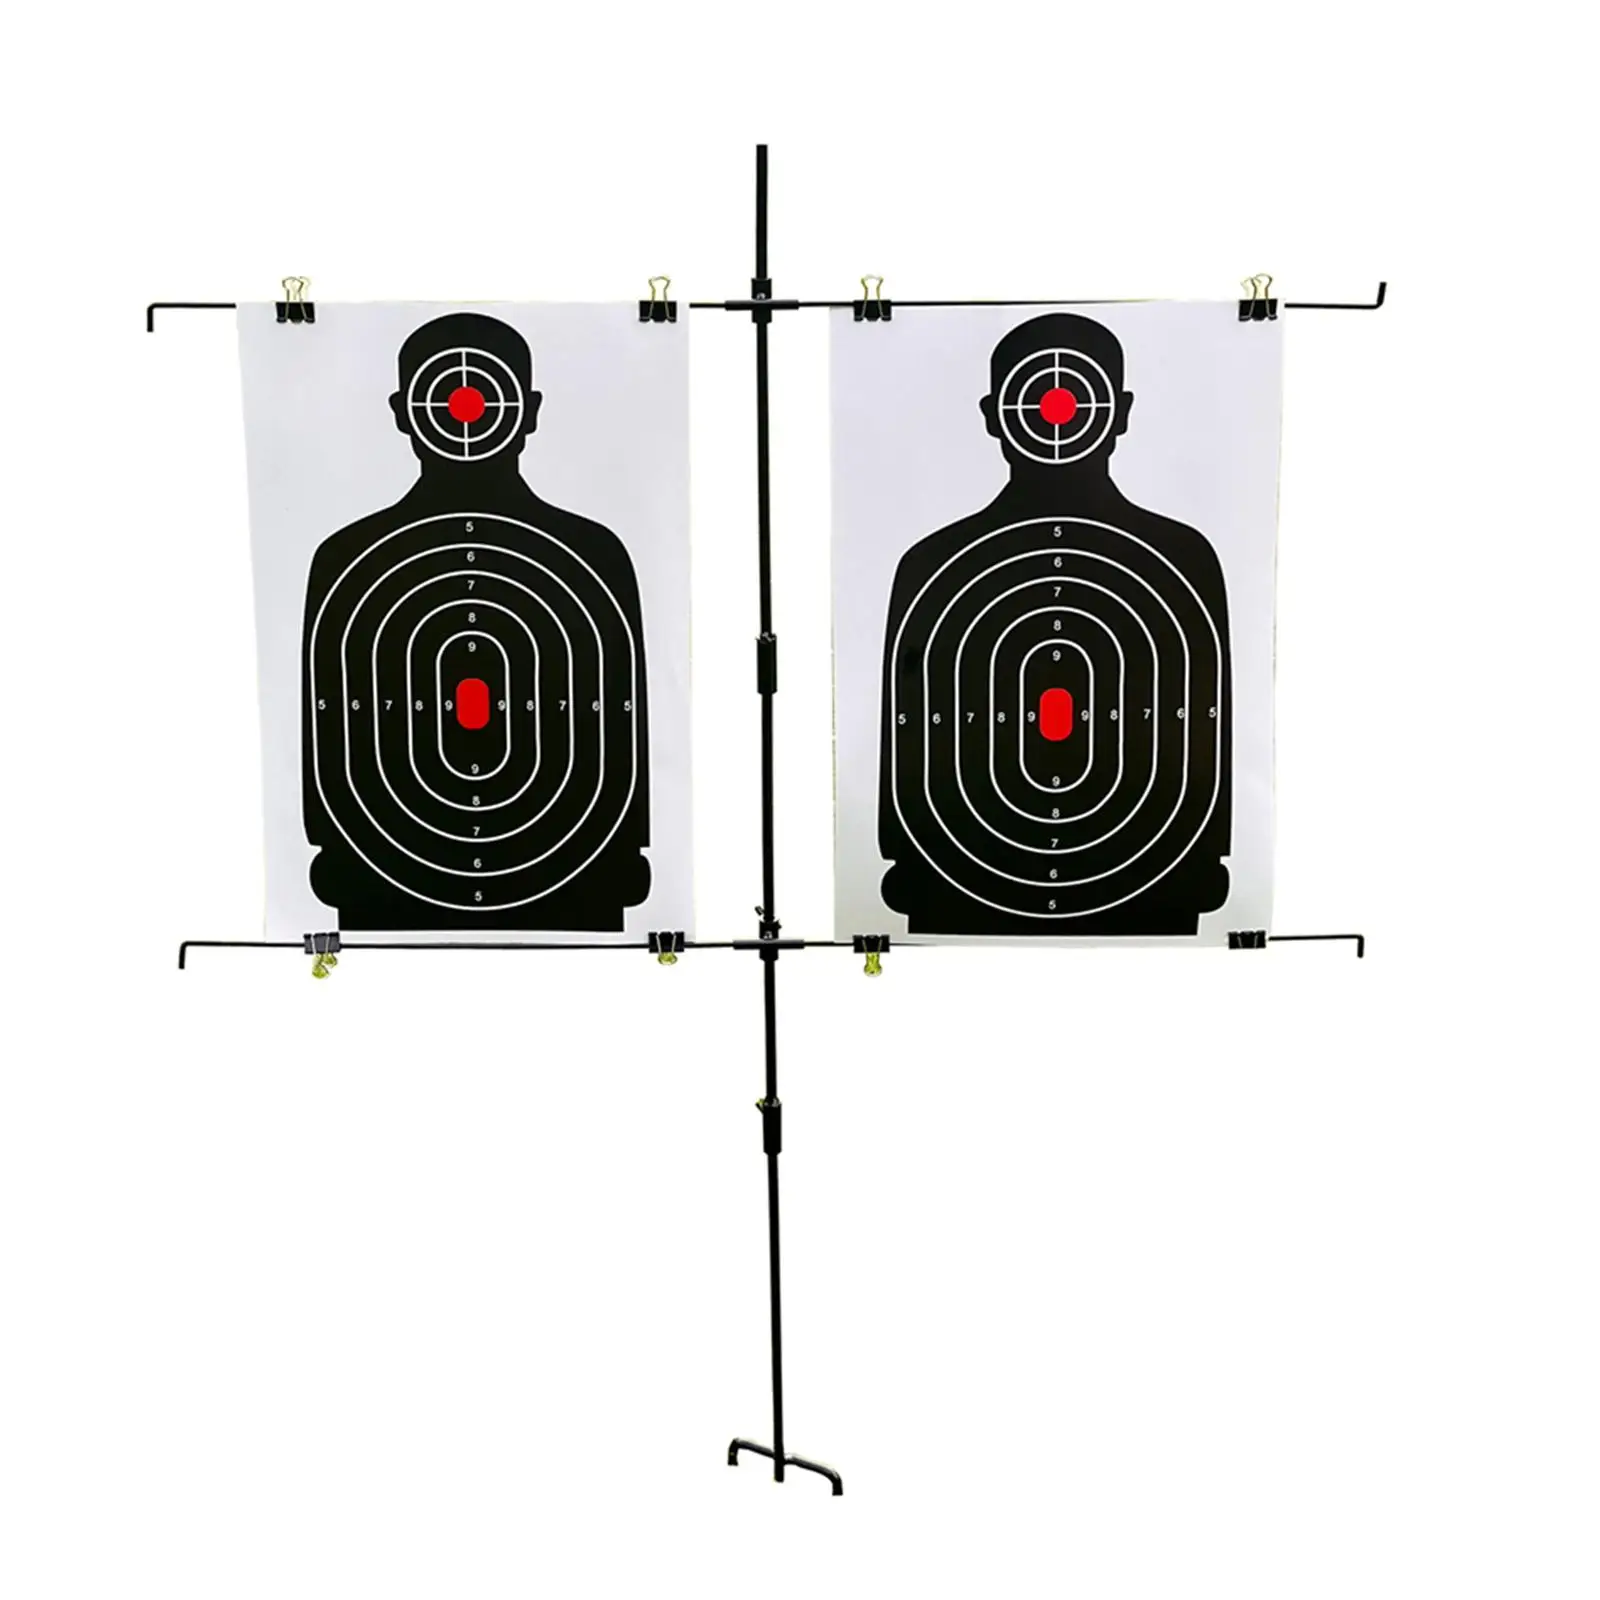 Adjustable Target Stand Holder Archery Range Practice Target Stand Base Detachable Durable with 8 Clips T Shape Brackets Double